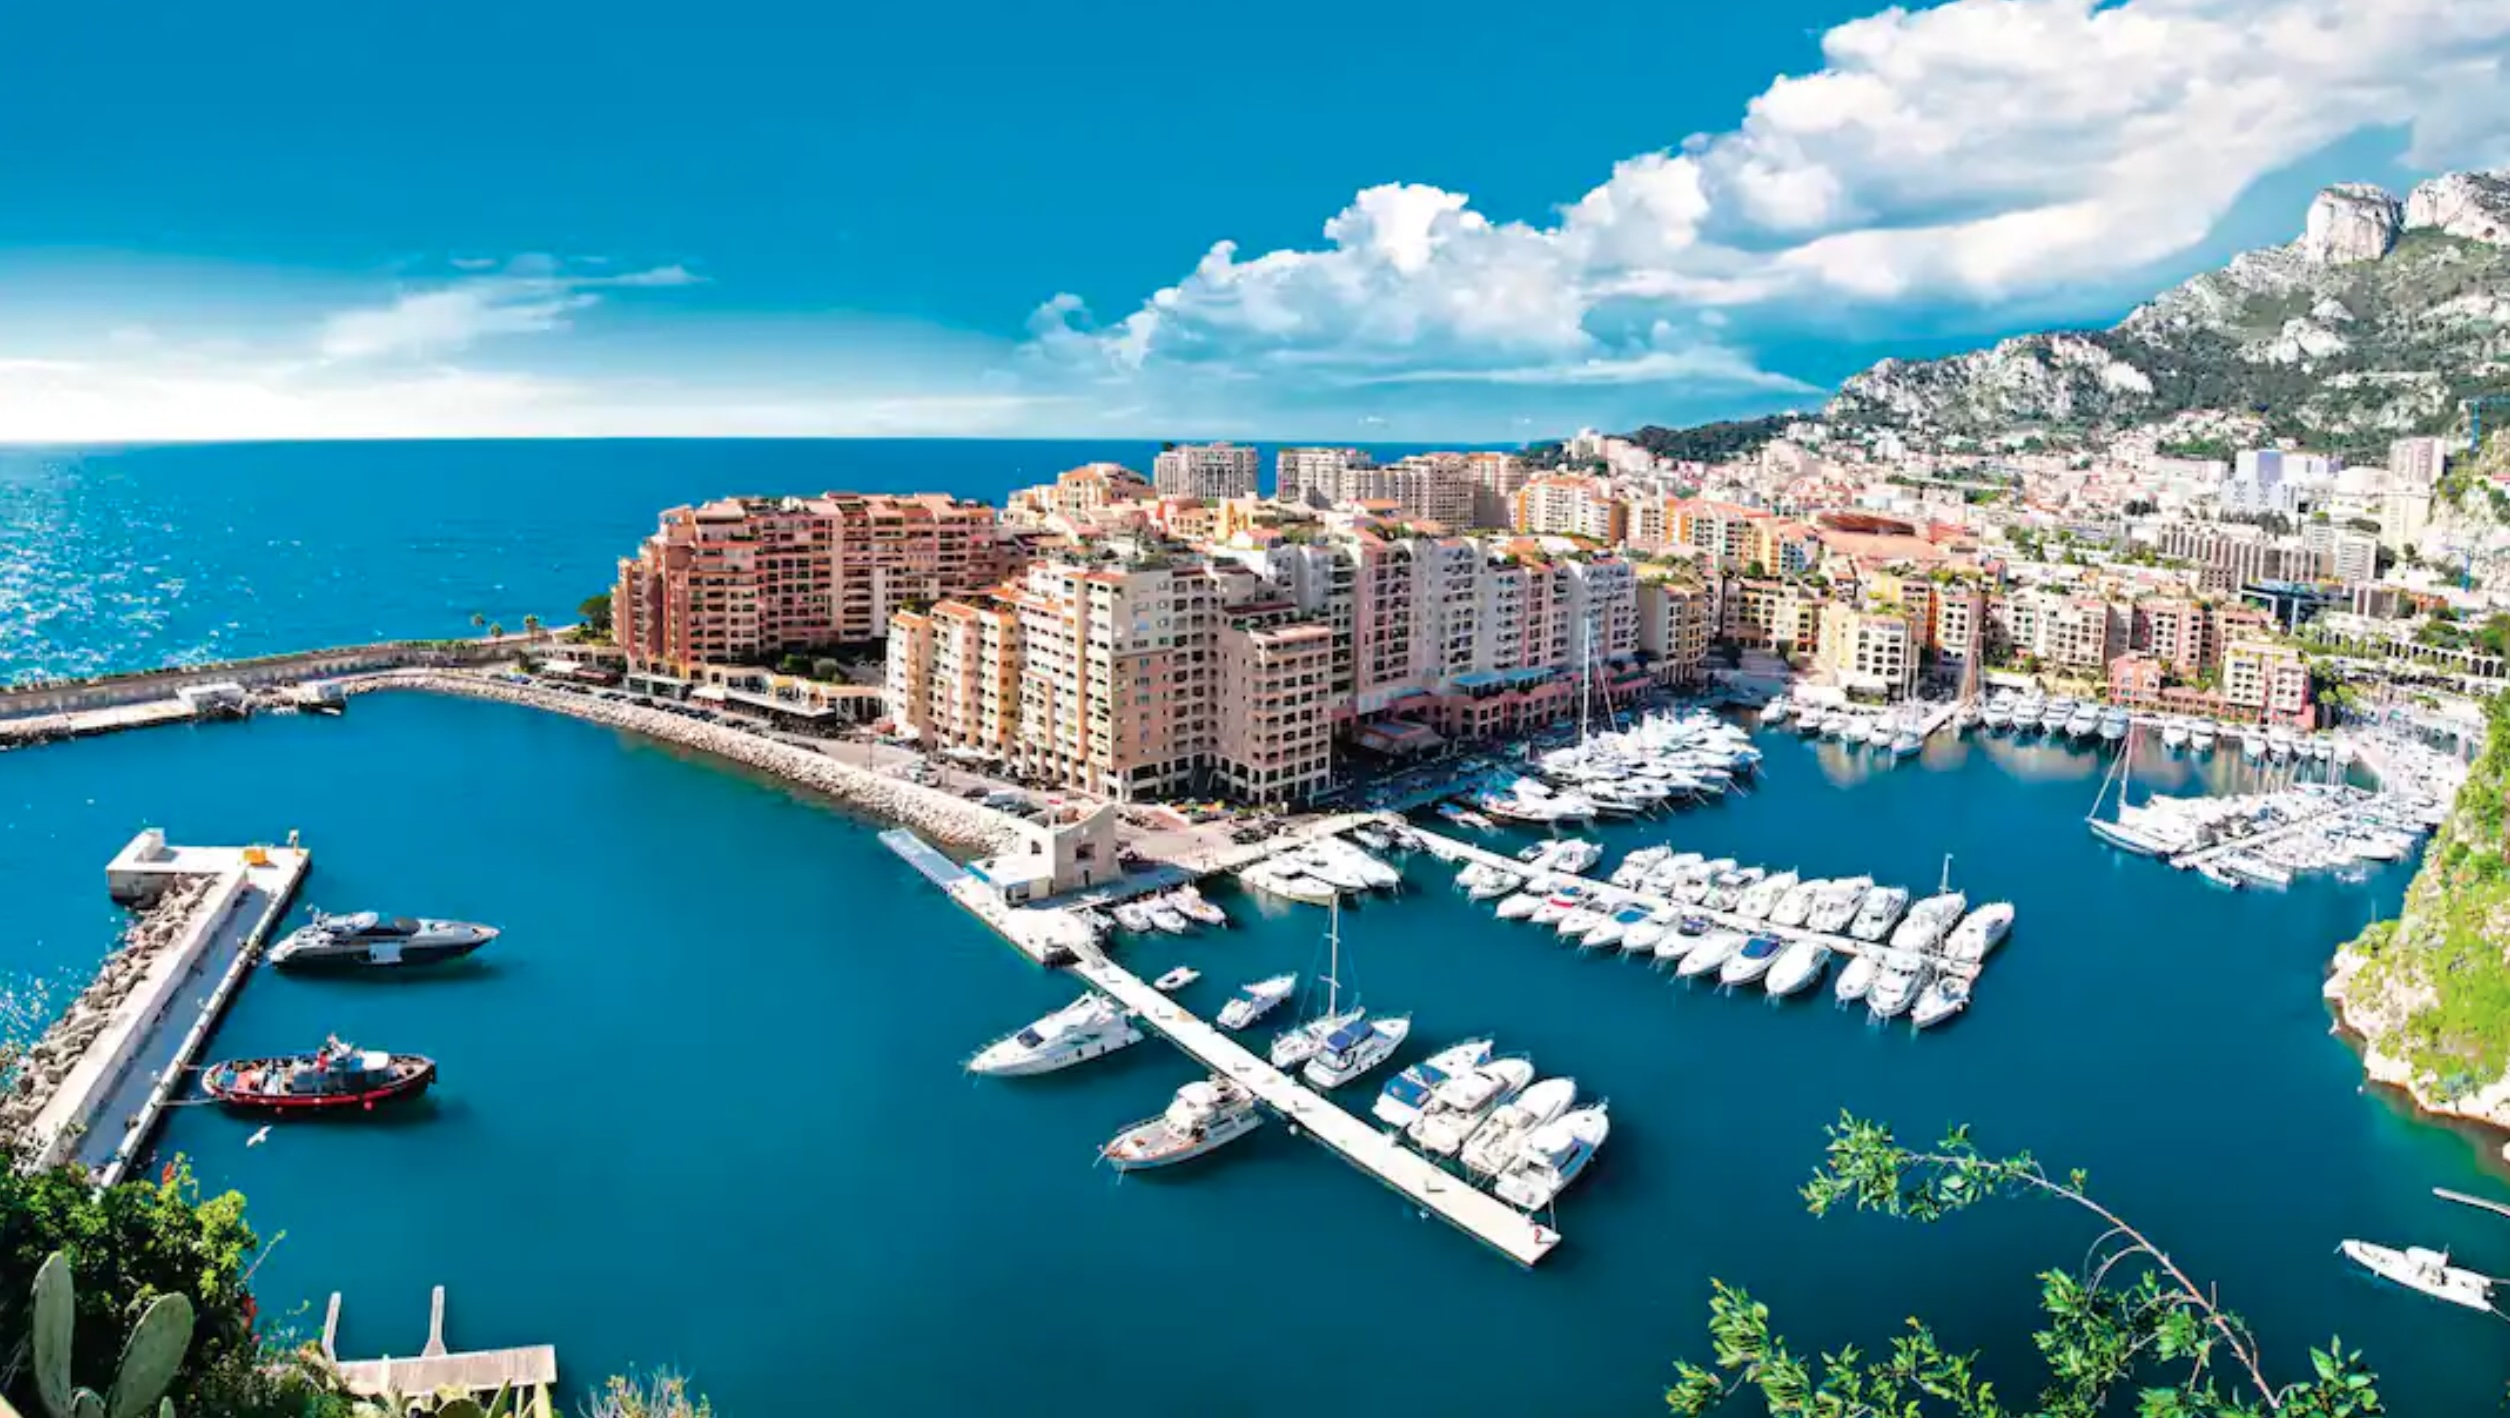 View of the harbour in Monaco